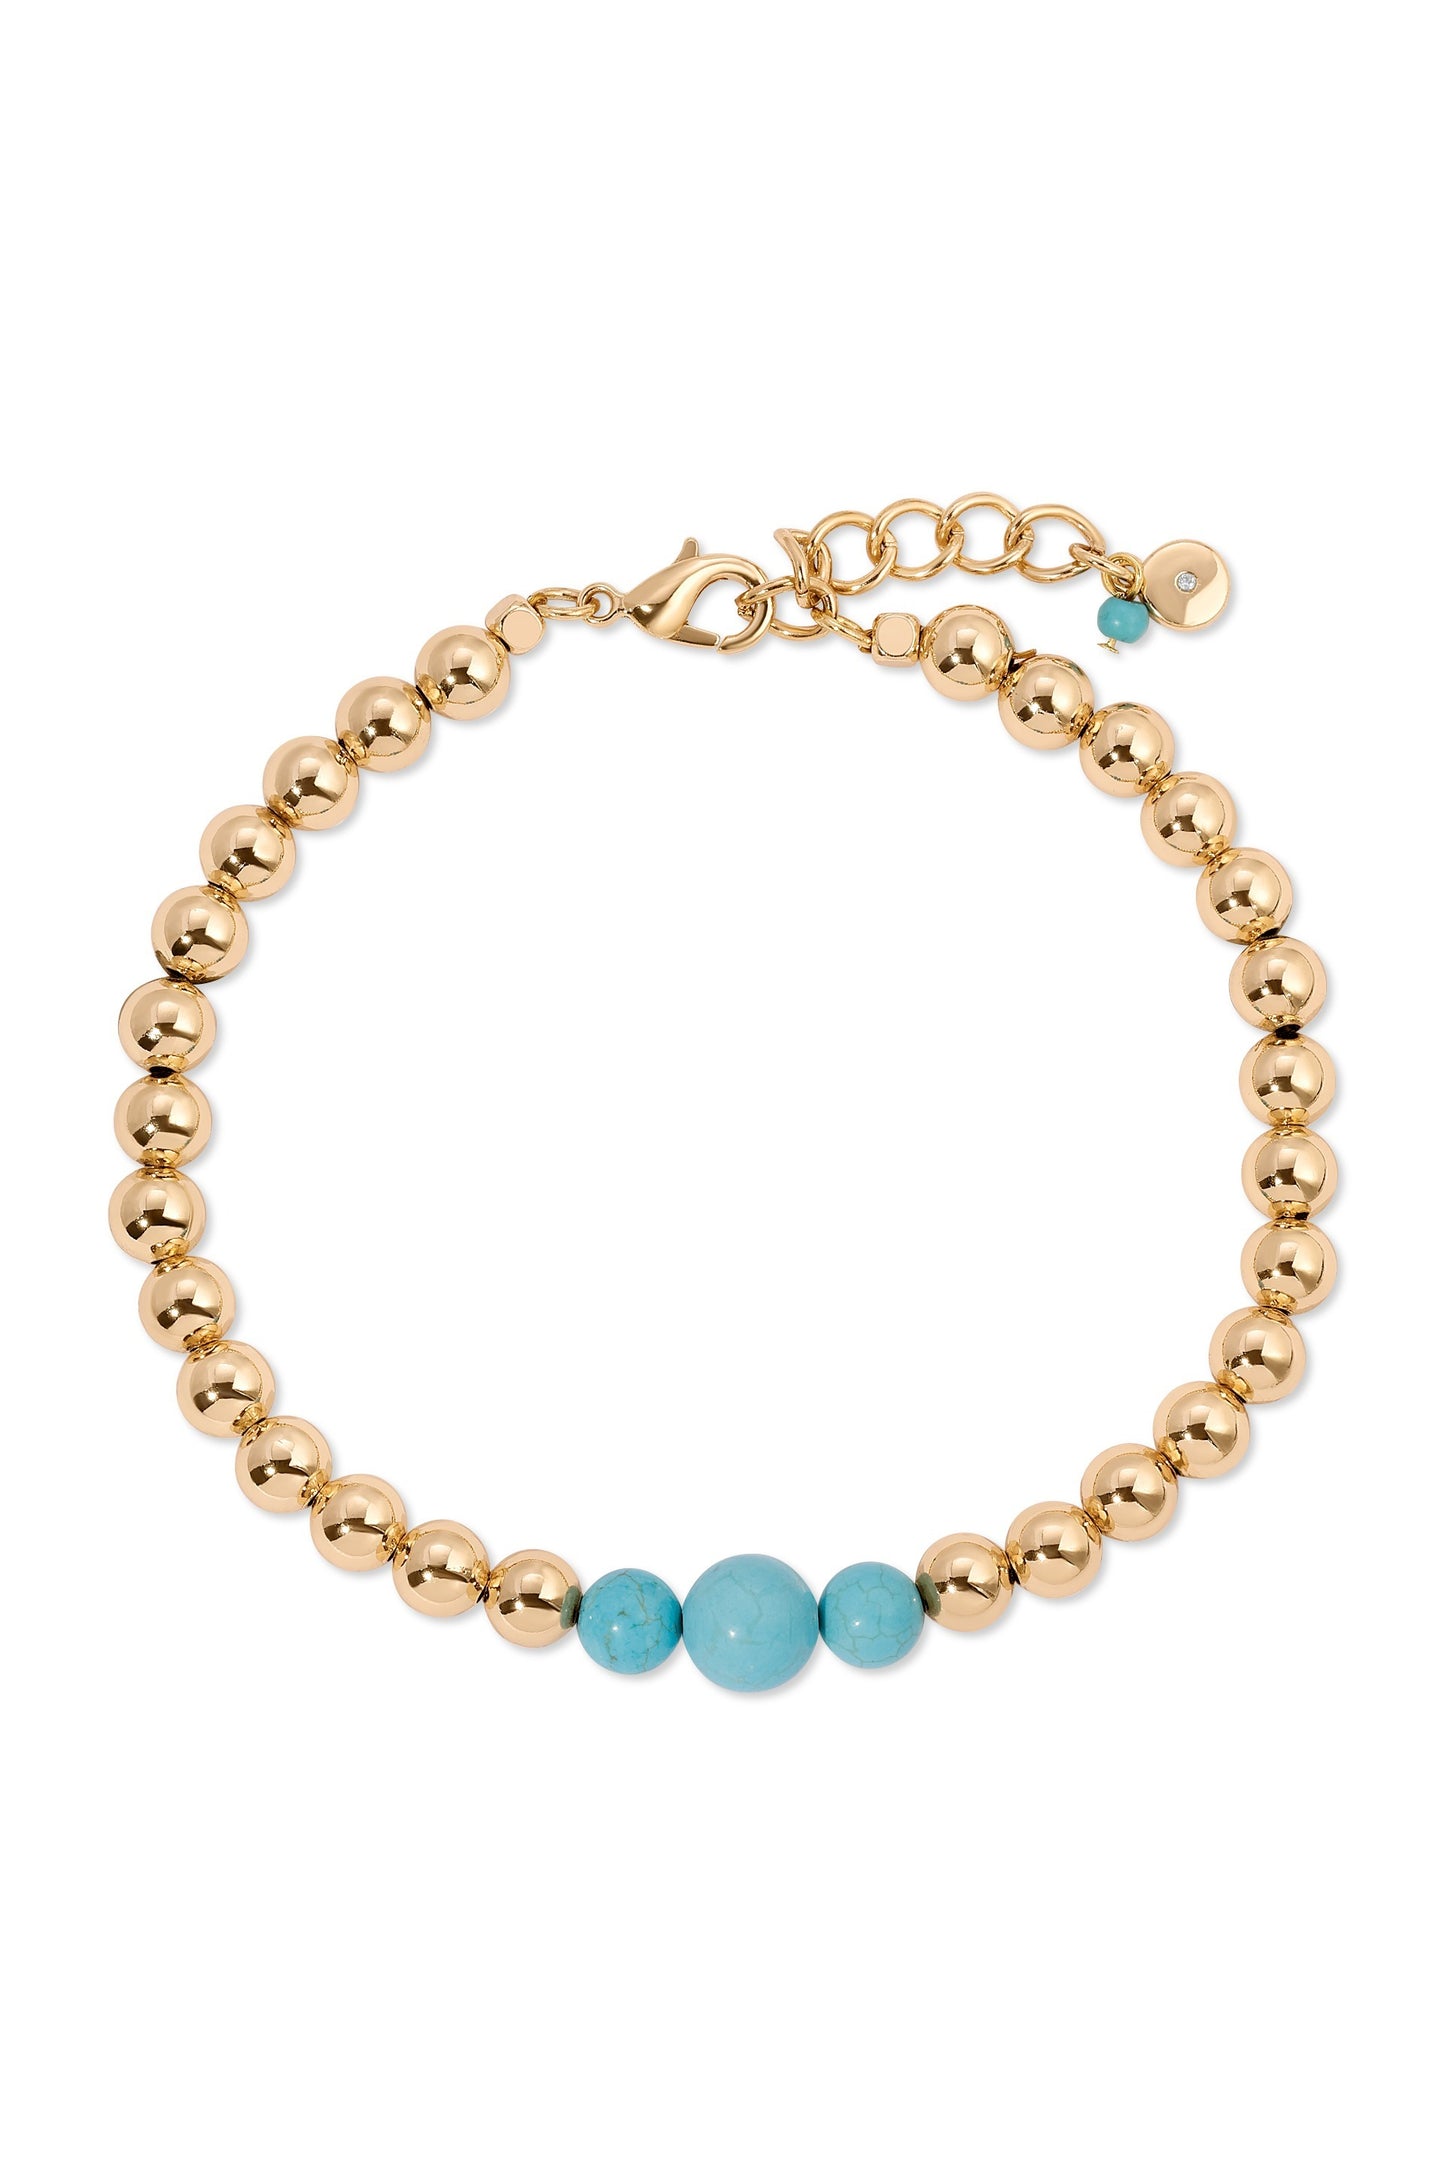 Crystal Ball Anklet in turquoise